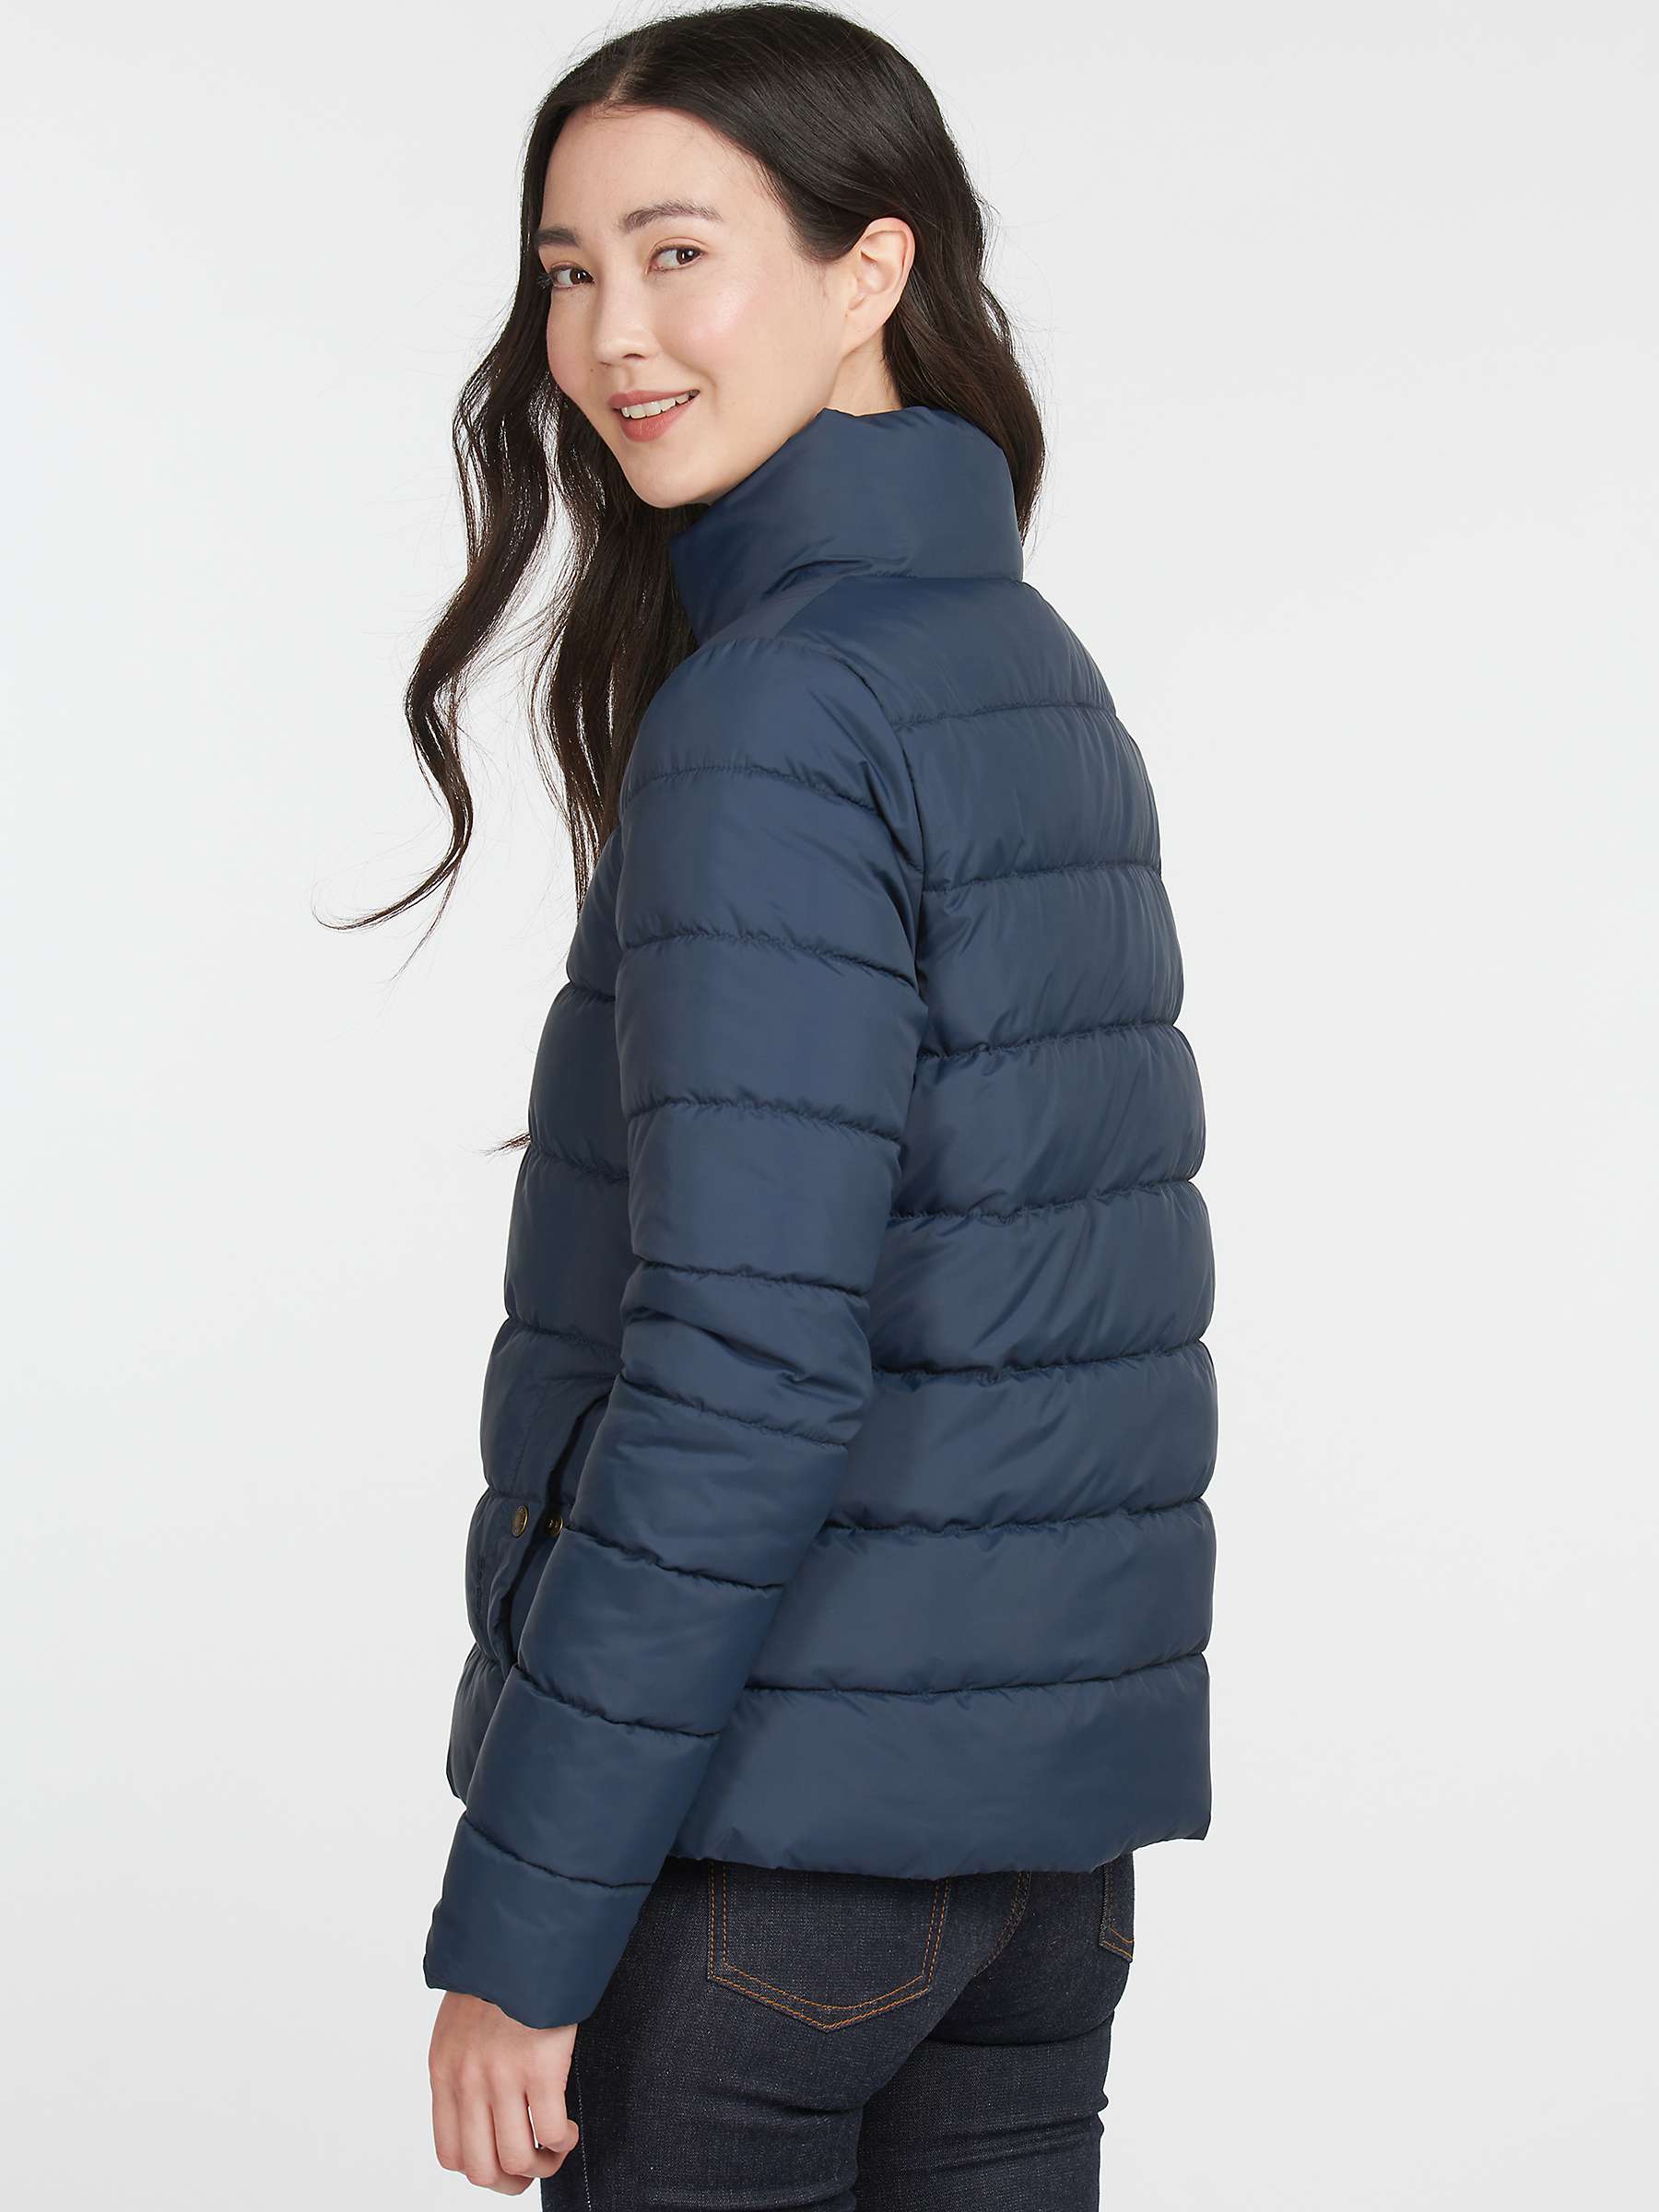 Buy Barbour Hinton Quilted Jacket Online at johnlewis.com